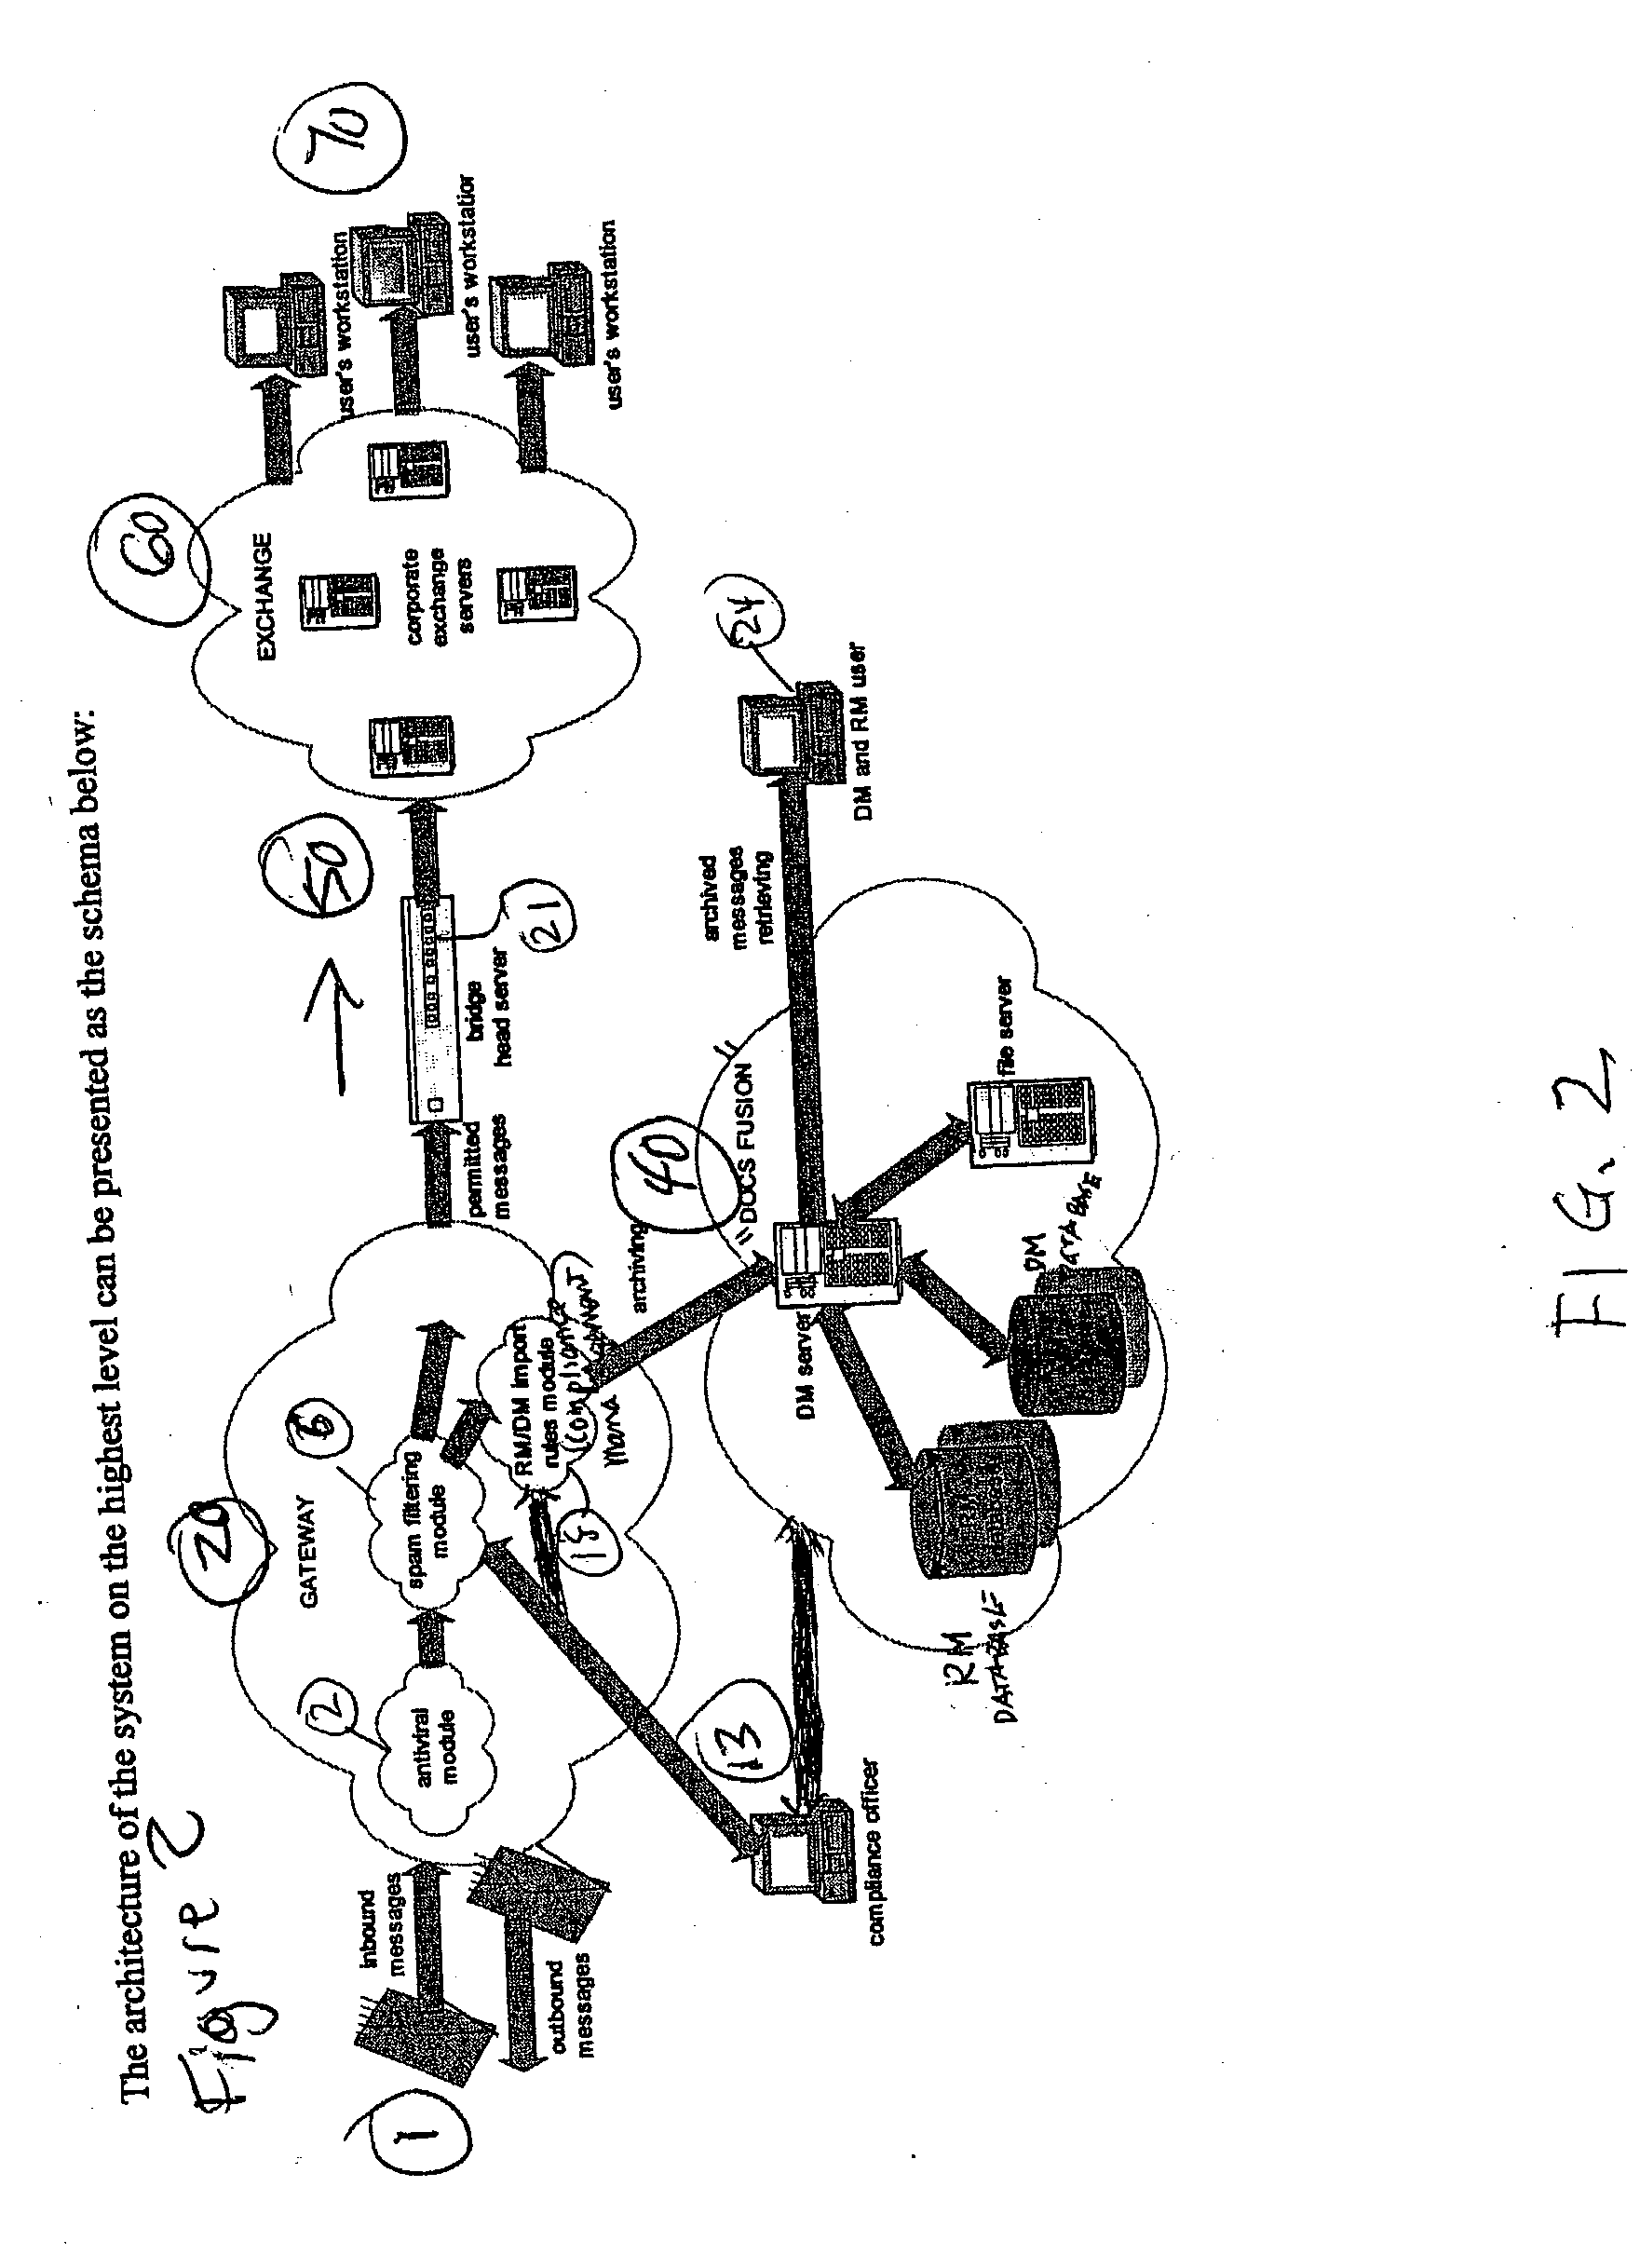 Method of and universal apparatus and module for automatically managing electronic communications, such as e-mail and the like, to enable integrity assurance thereof and real-time compliance with pre-established regulatory requirements as promulgated in government and other compliance database files and information websites, and the like